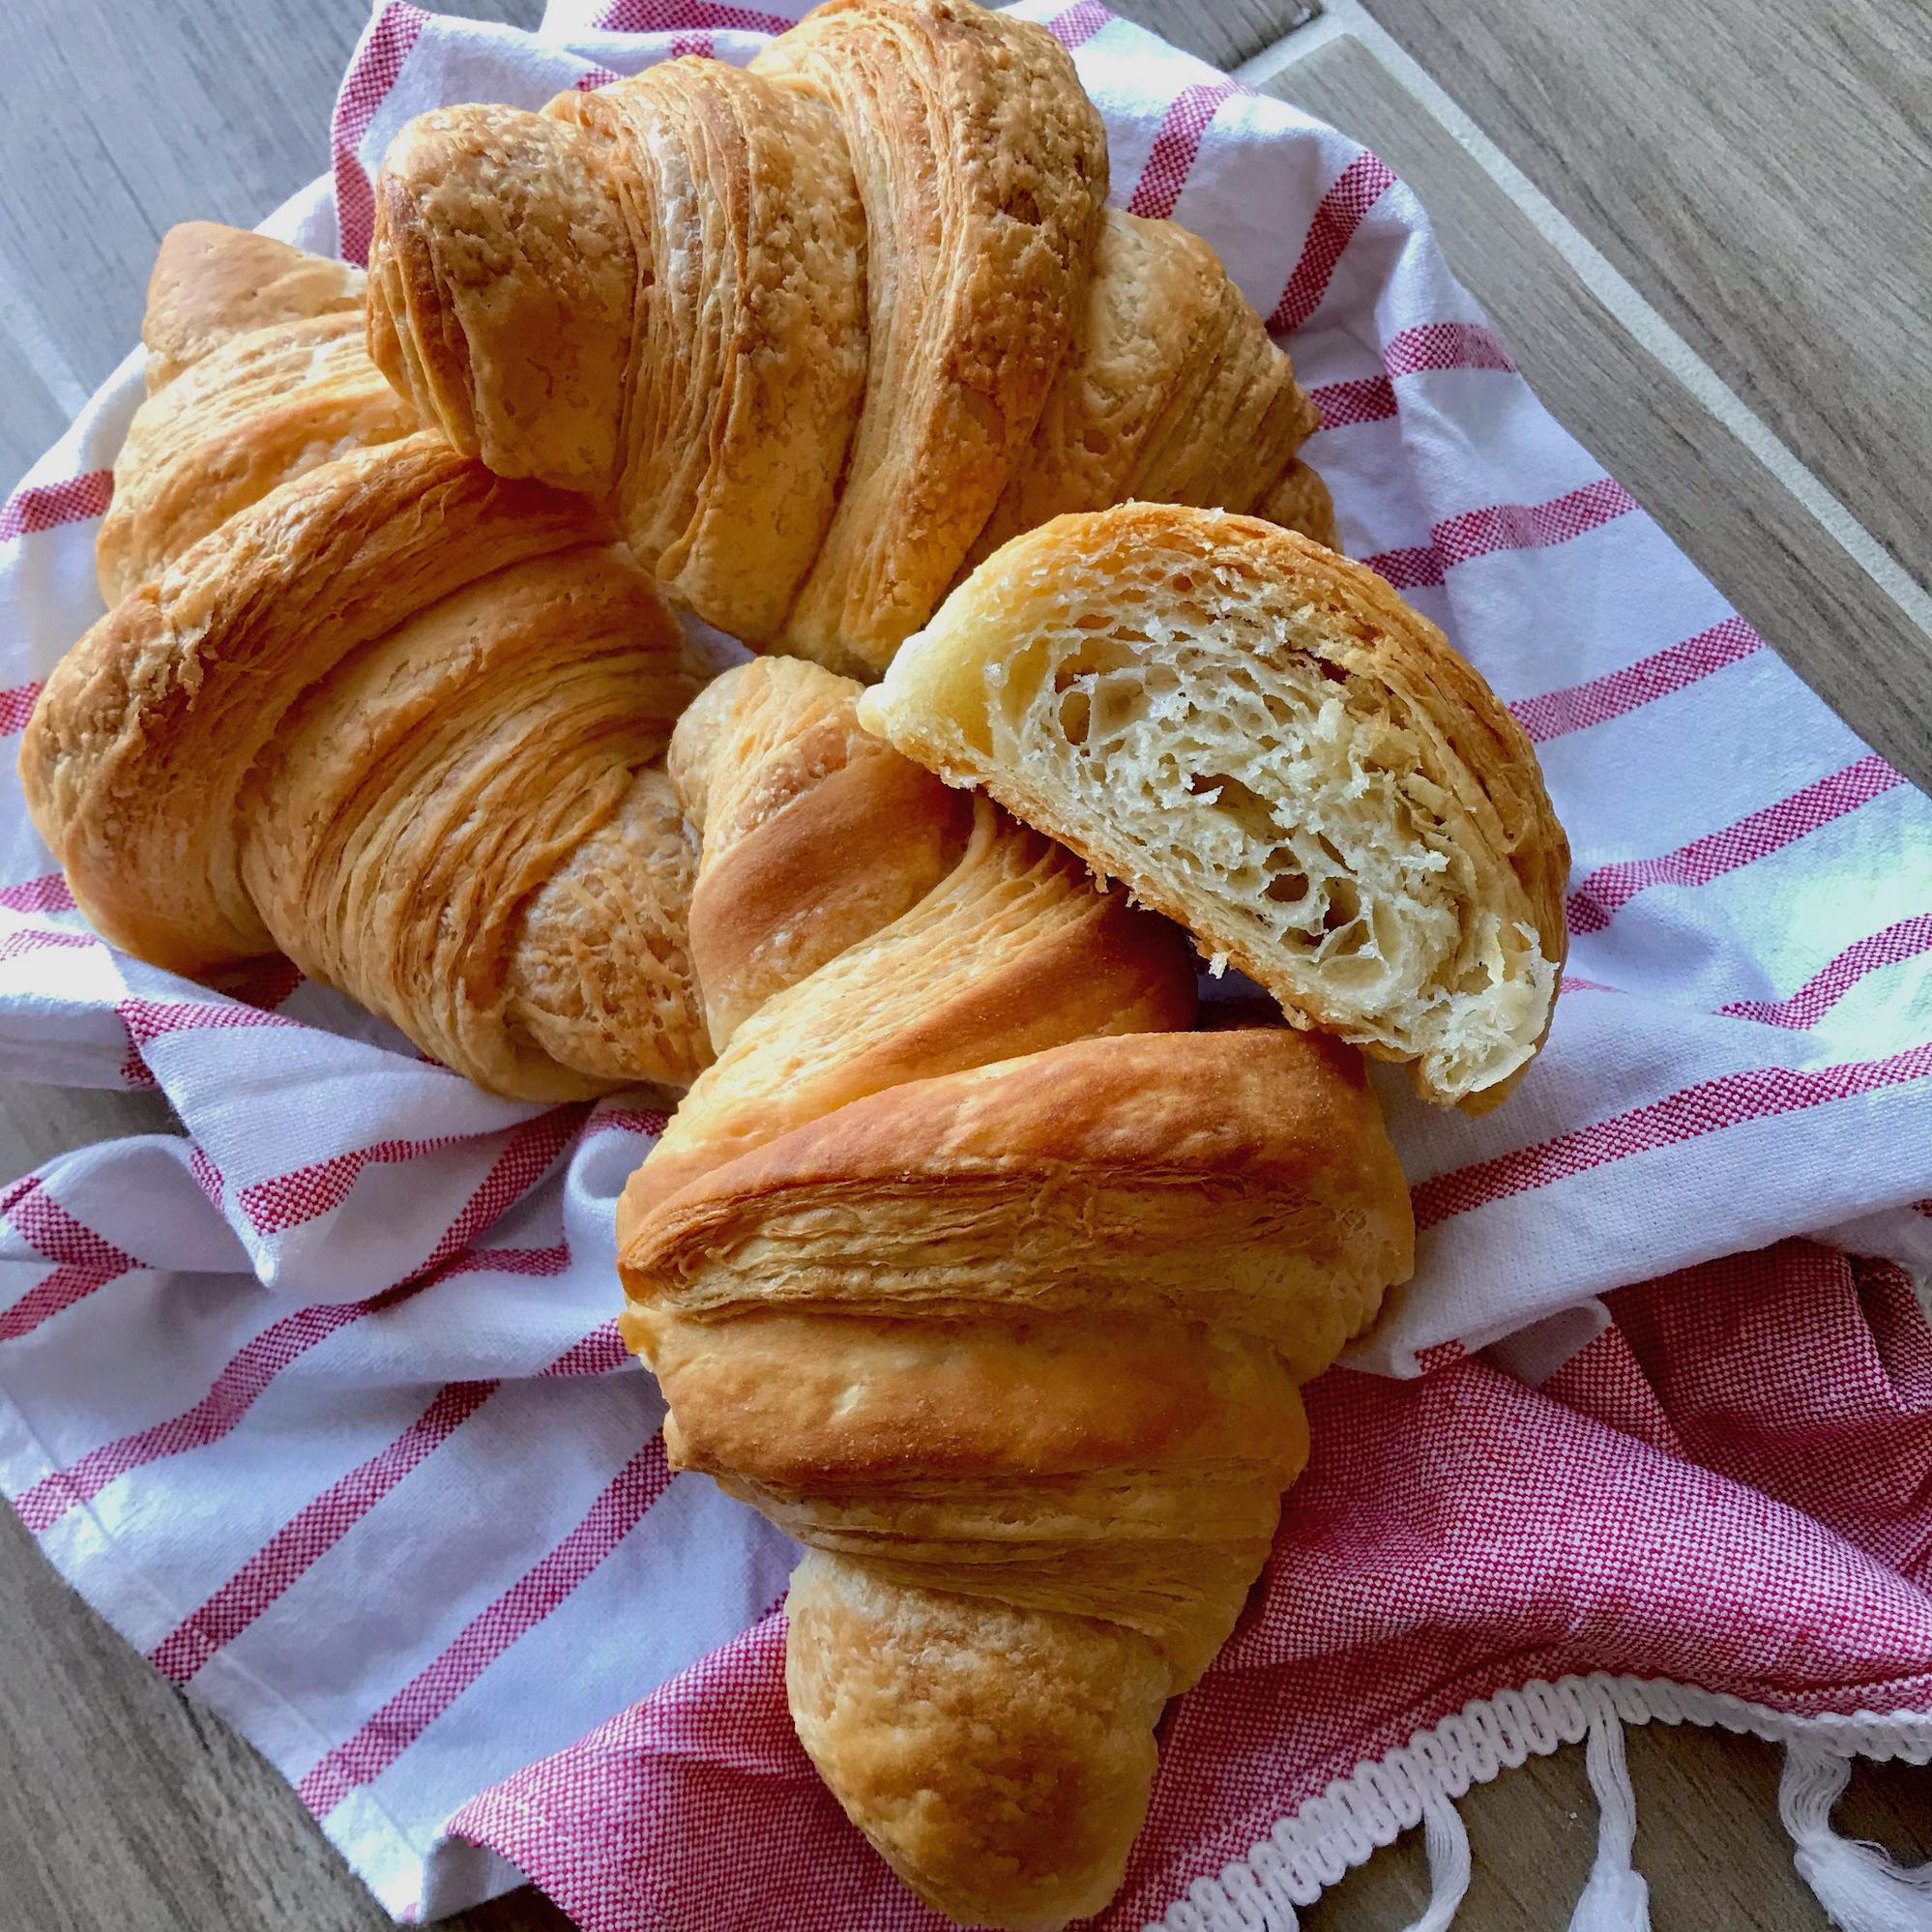  I dare you to try these vegan croissants and not fall in love.